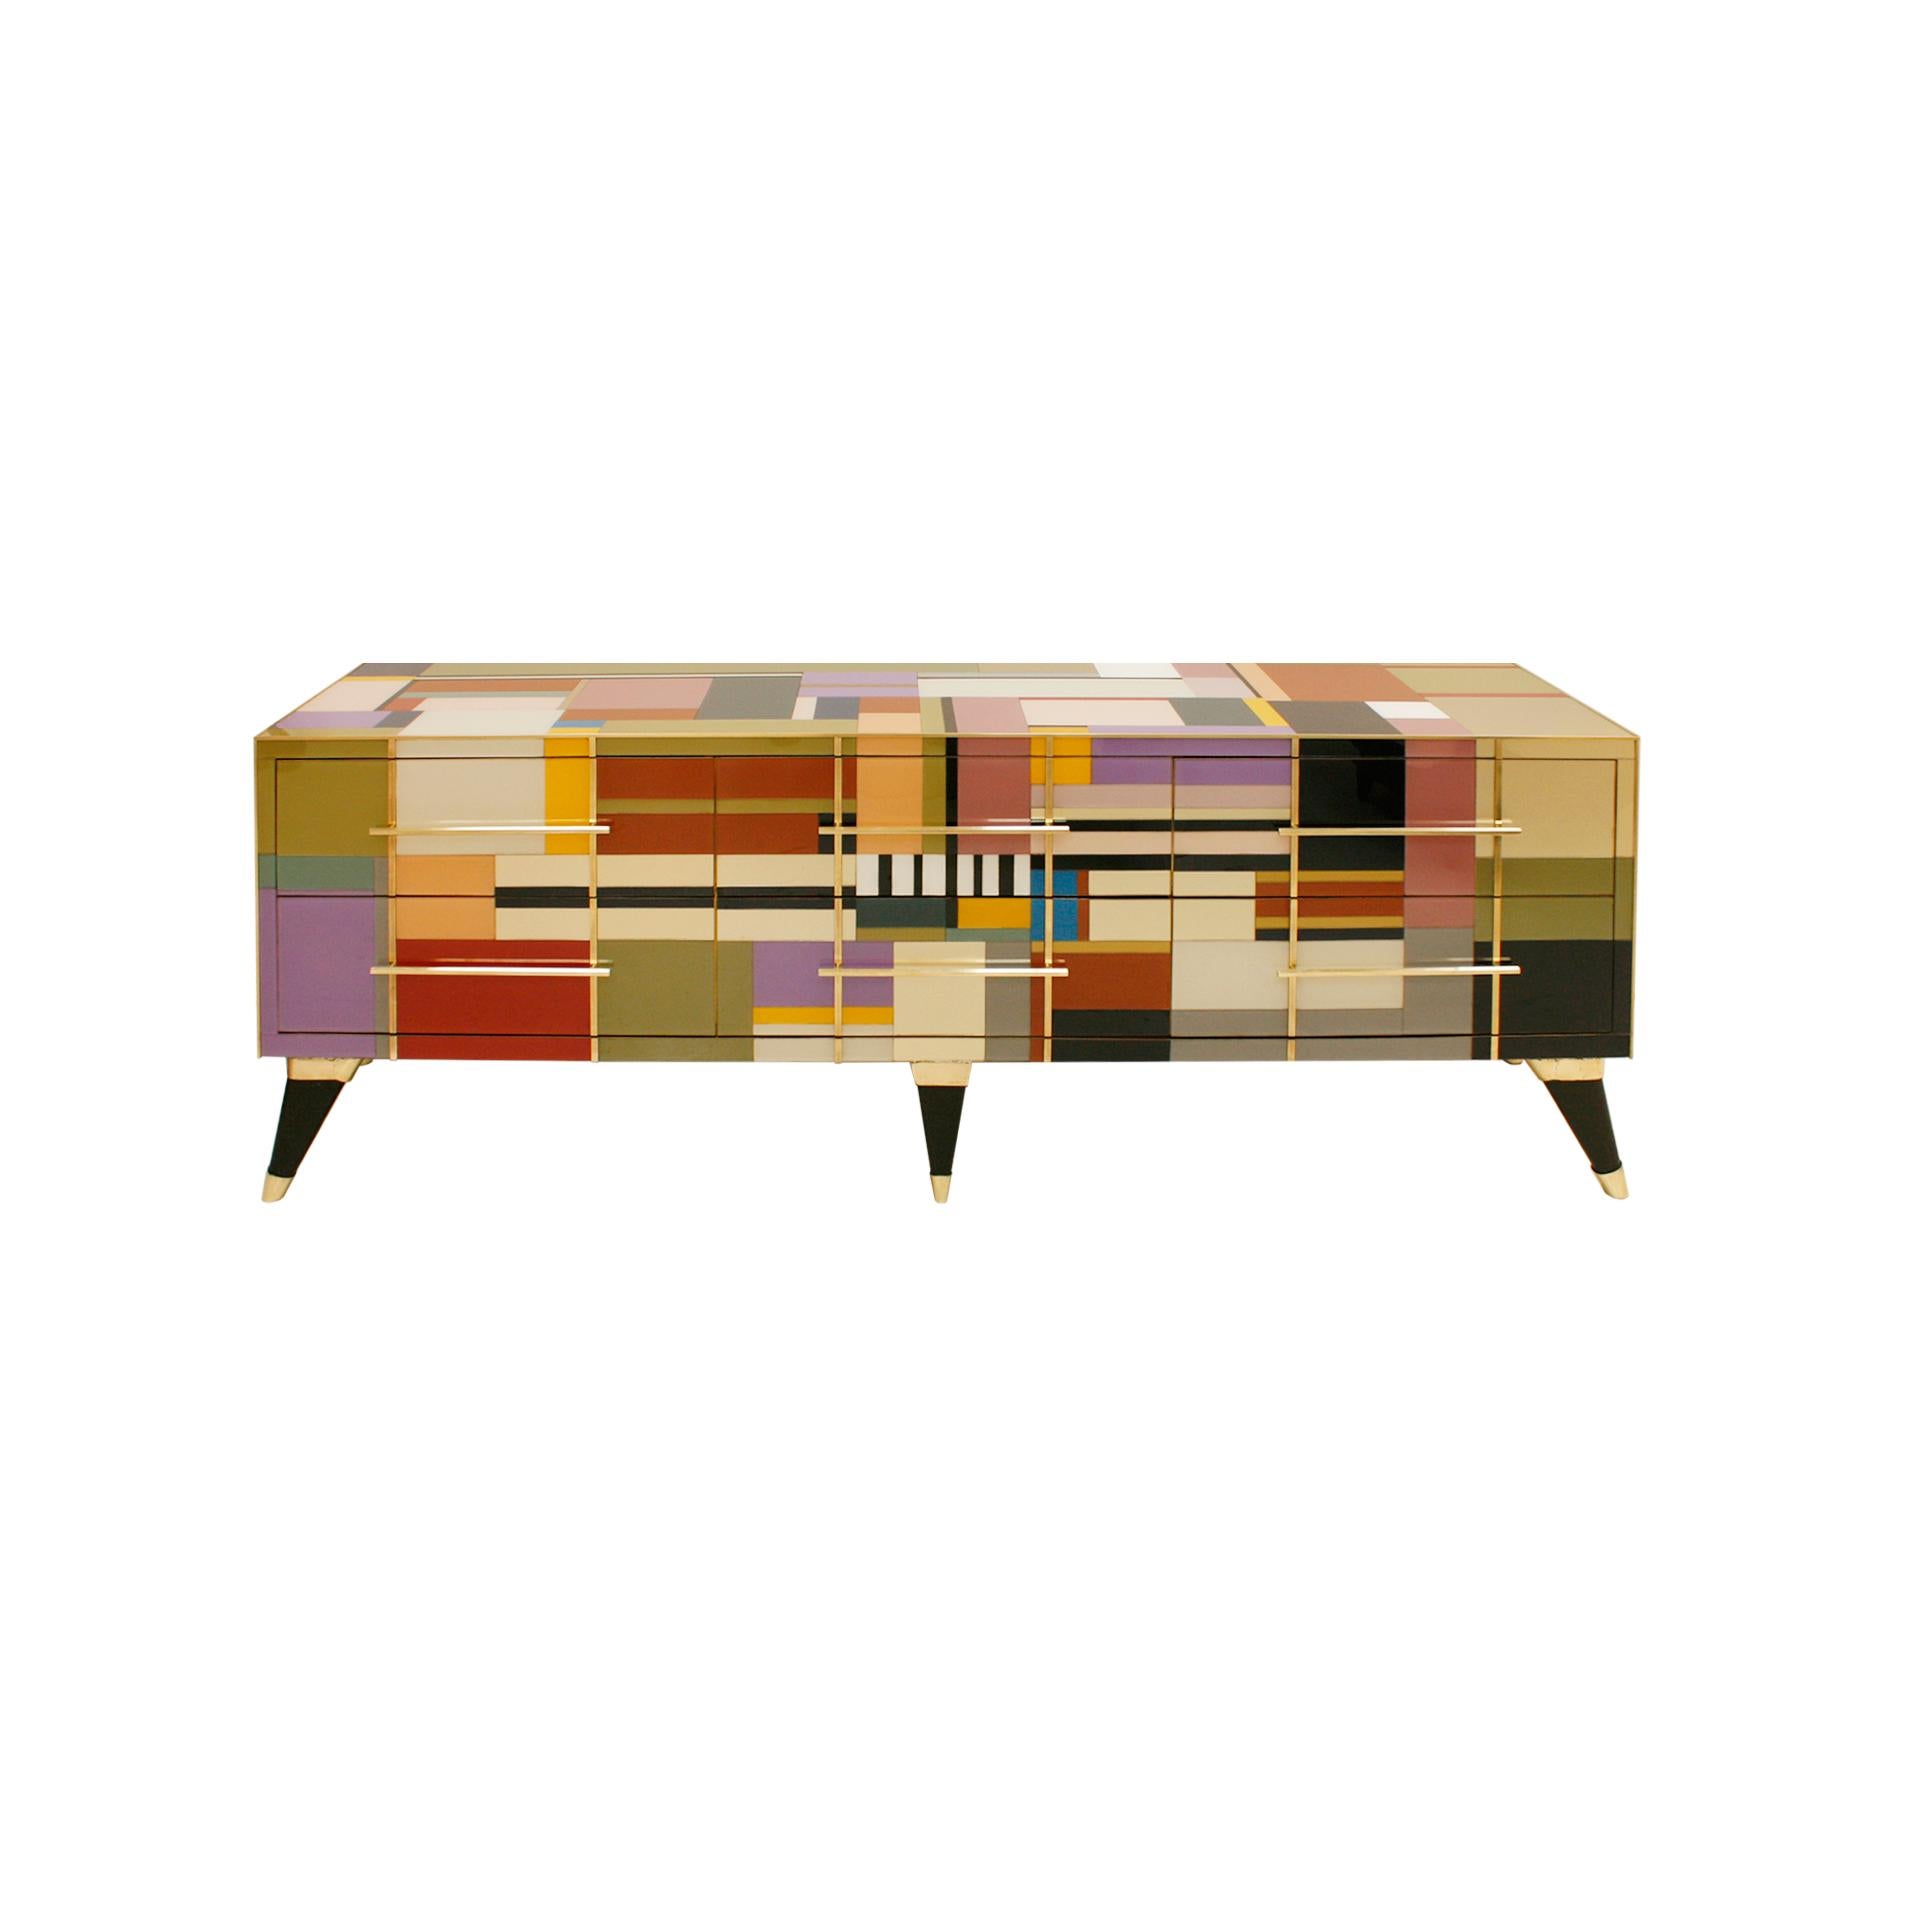 Italian sideboard designed by L.A. Studio. Made of solid wood structure, covered in colored glass. Brass profiles and handles. Composed of six drawers. Made in Italy.